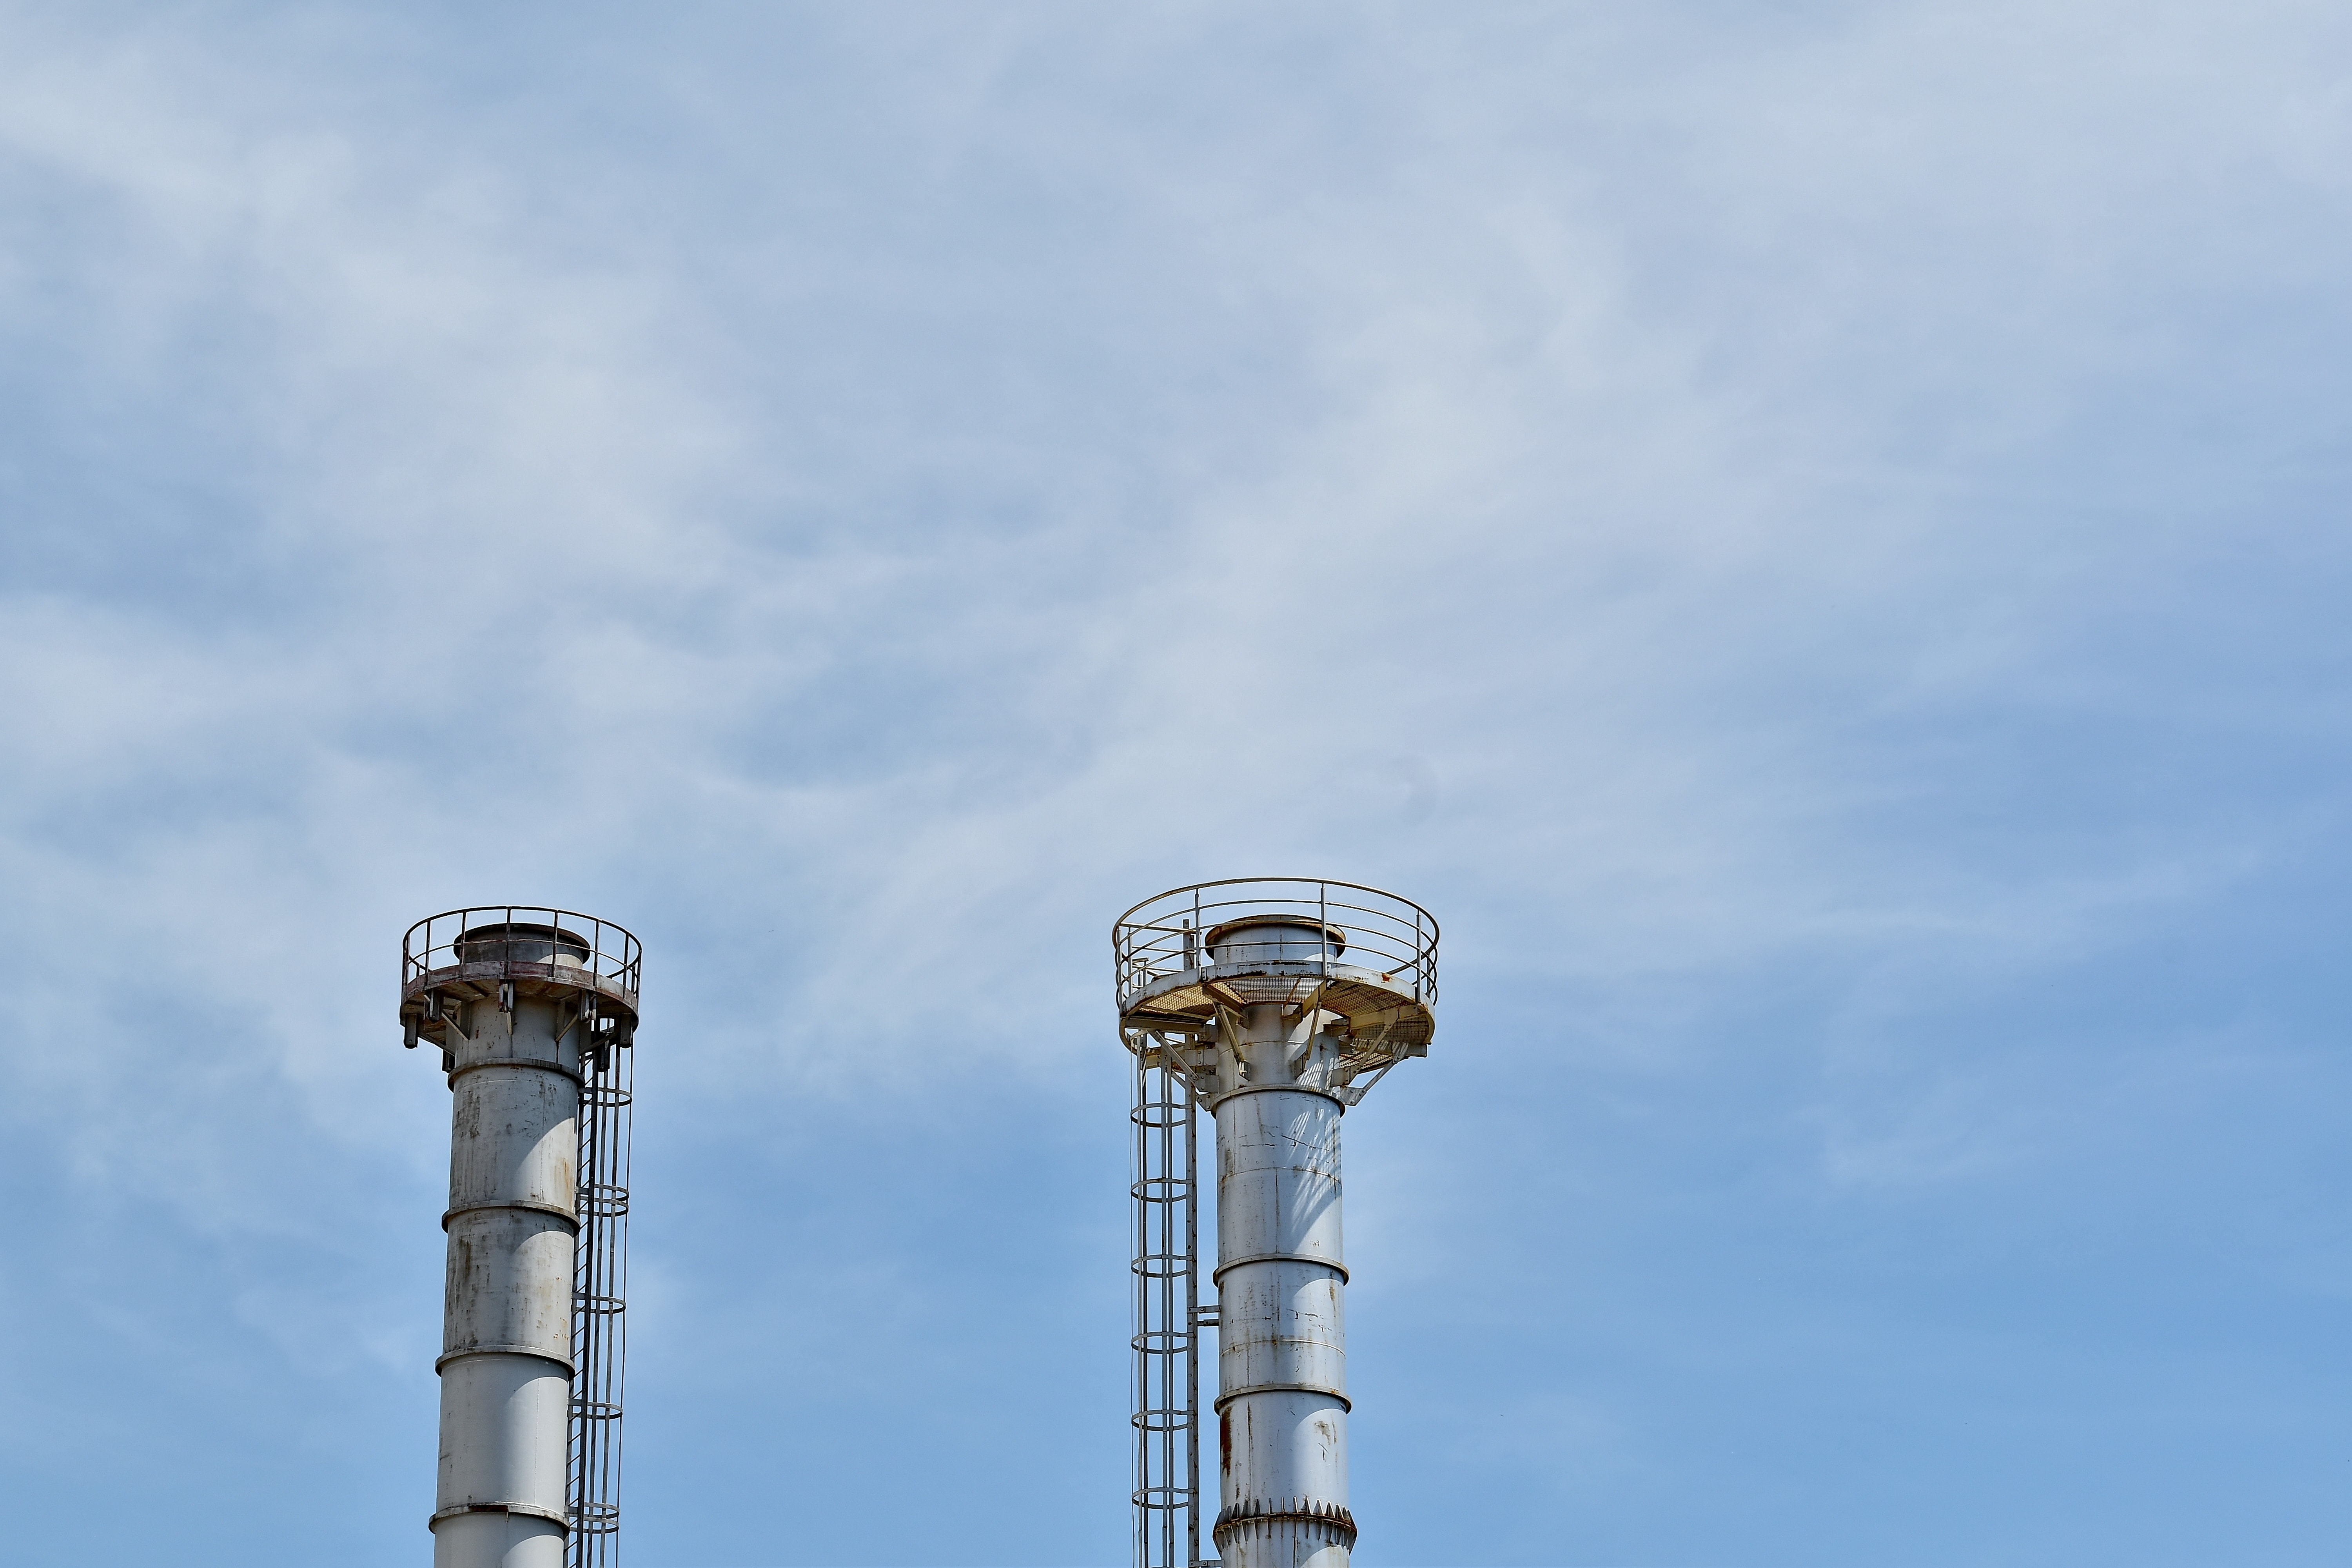 Free picture: height, industrial, metallic, tower, pollution, chimney, high, blue sky, steel, electricity